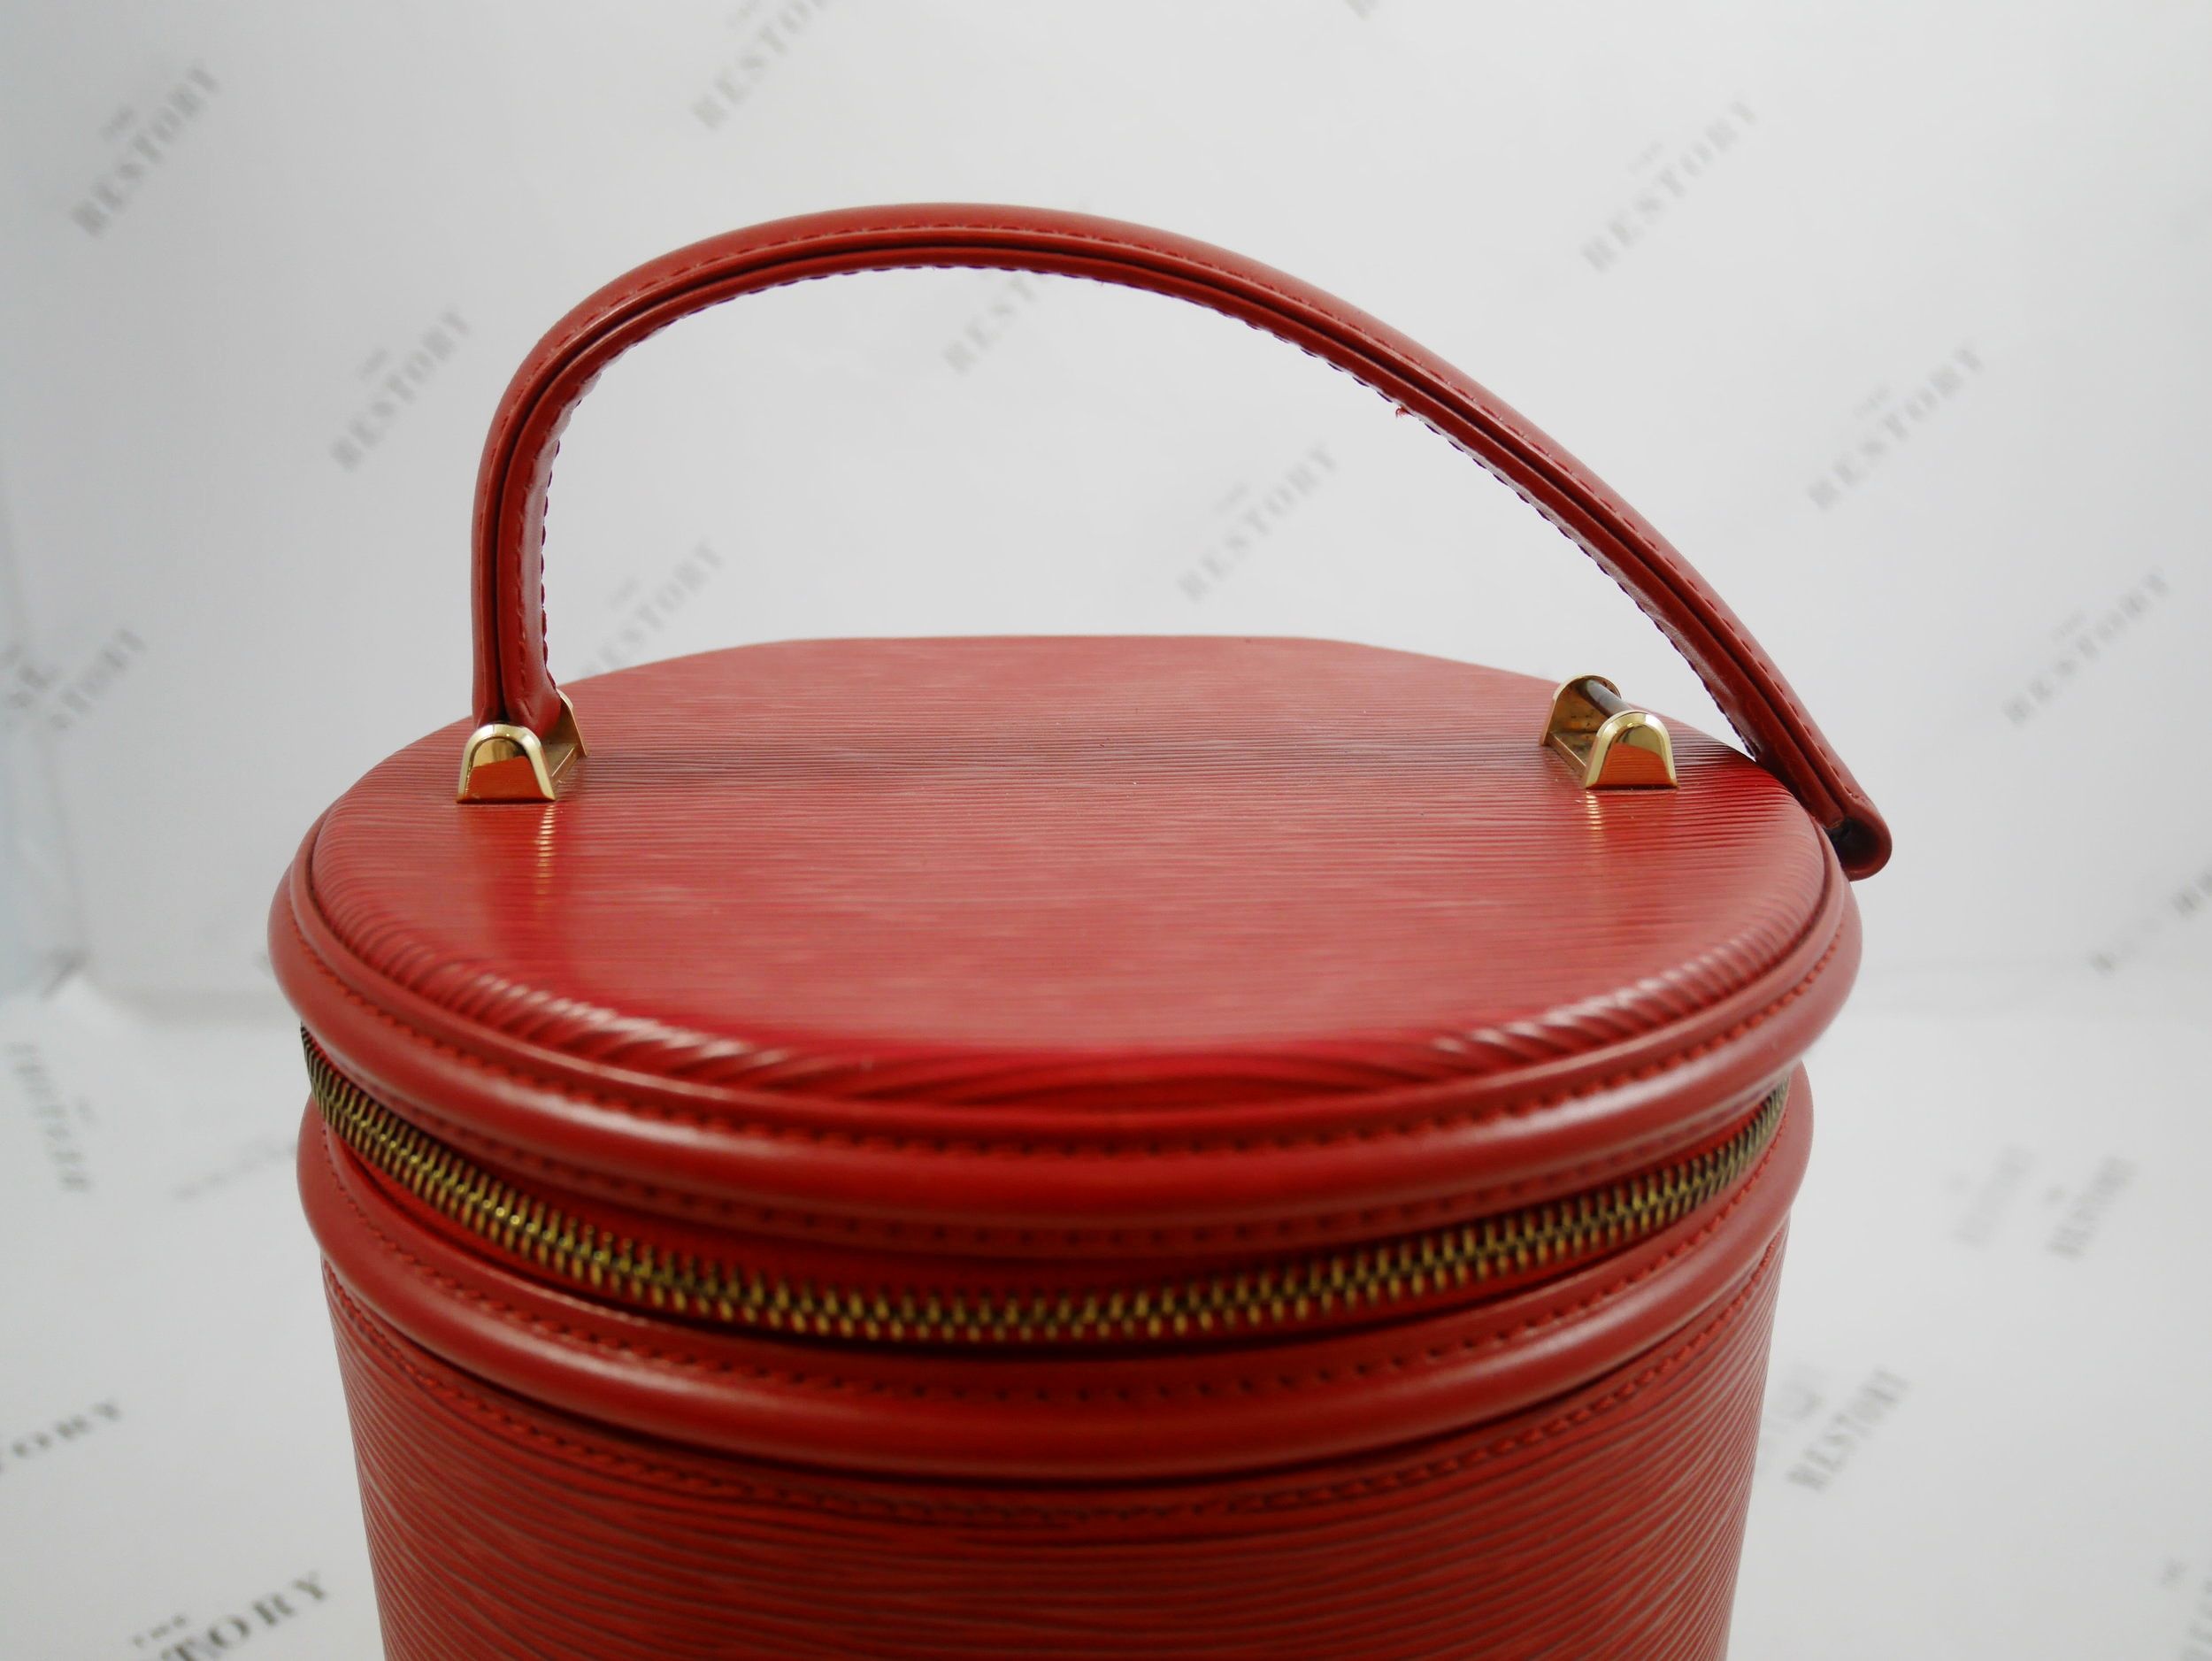 Pre-loved Vintage Authentic Louis Vuitton Red Epi Leather Cannes